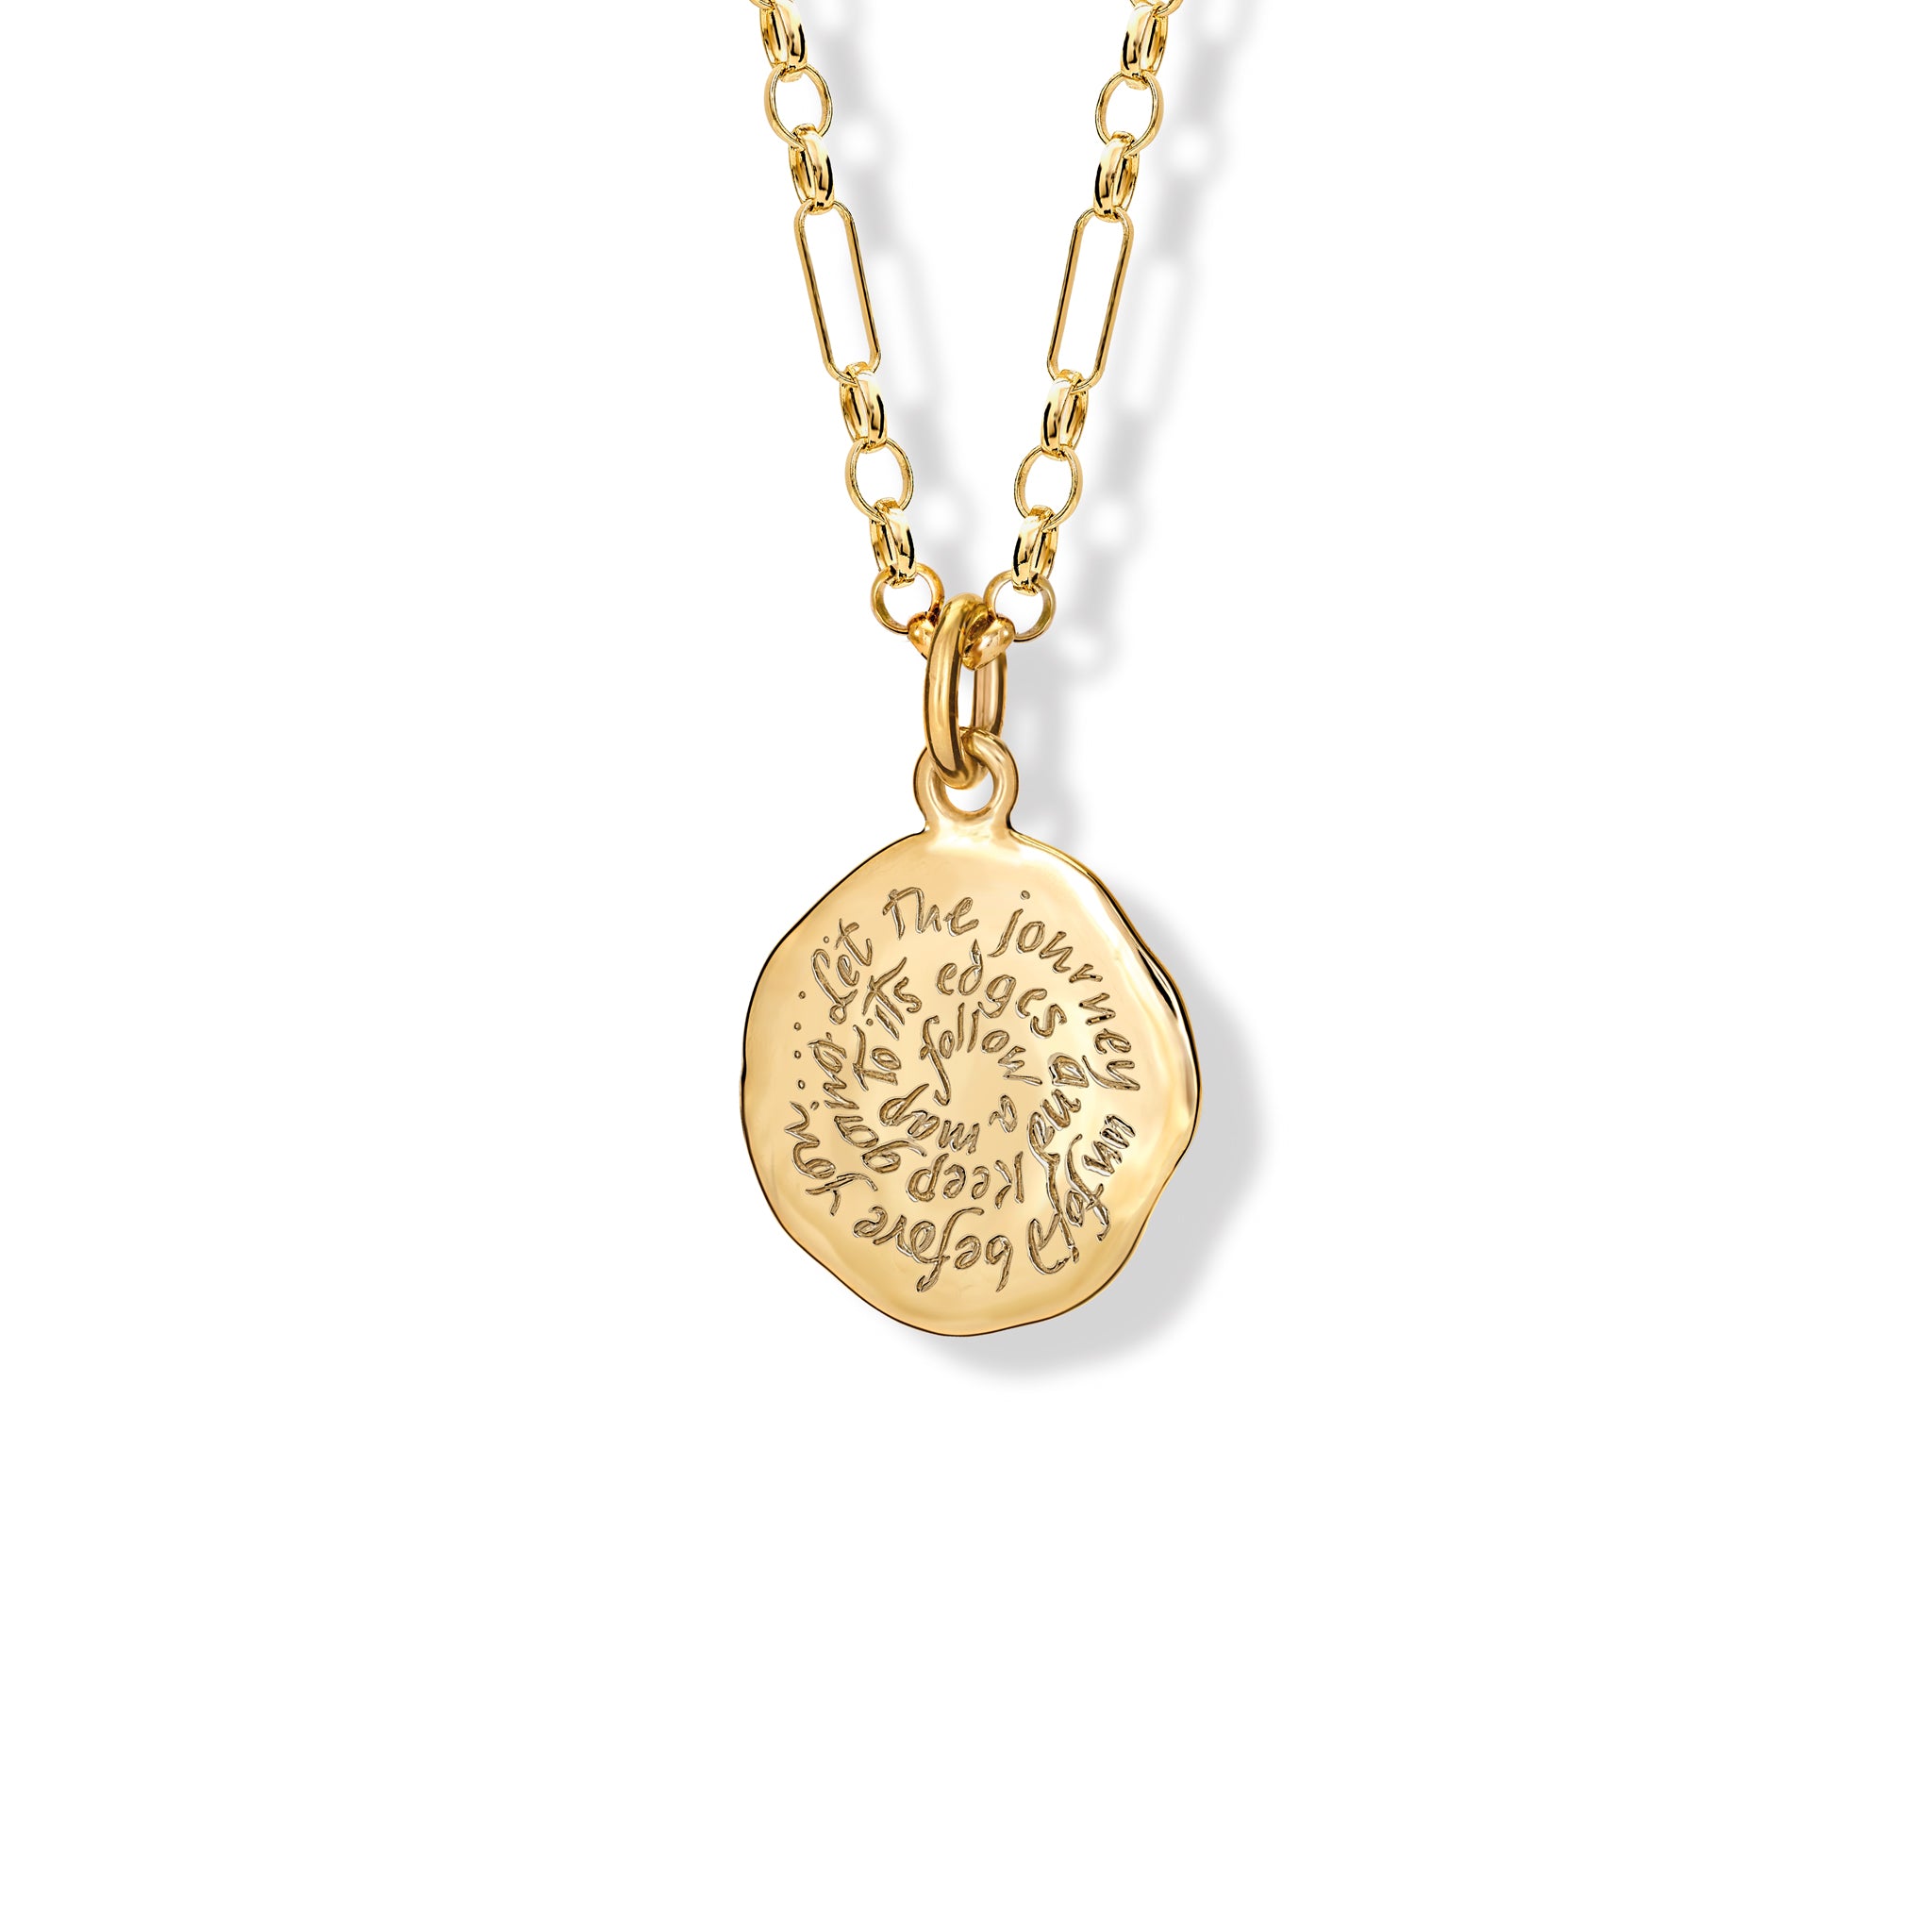 Follow A Map To Its Edges Quote Pendant Yellow Gold